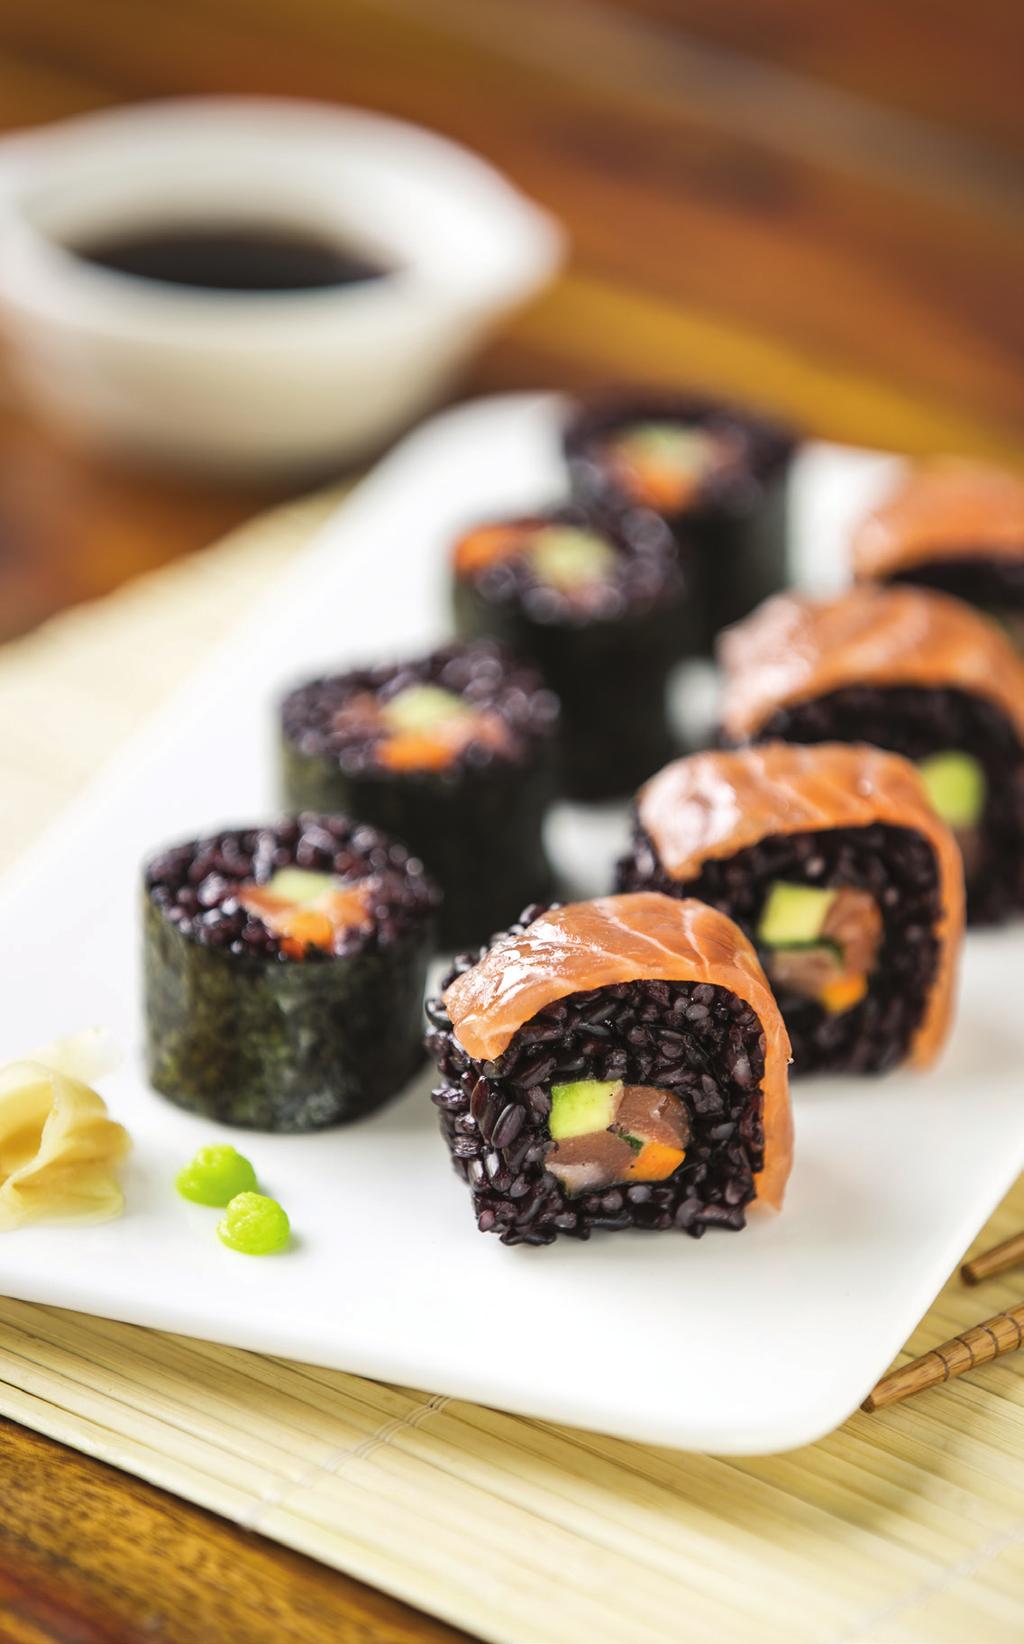 PURIFYING RECIPES VENERE BLACK RICE SUSHI ROLLS Serves 6-8 people For the sushi rolls 15 oz forbidden black rice 4 cups water 1 tsp salt 1/3 cup + 1/2 tbsp rice vinegar 1/2 tbsp maple syrup or honey